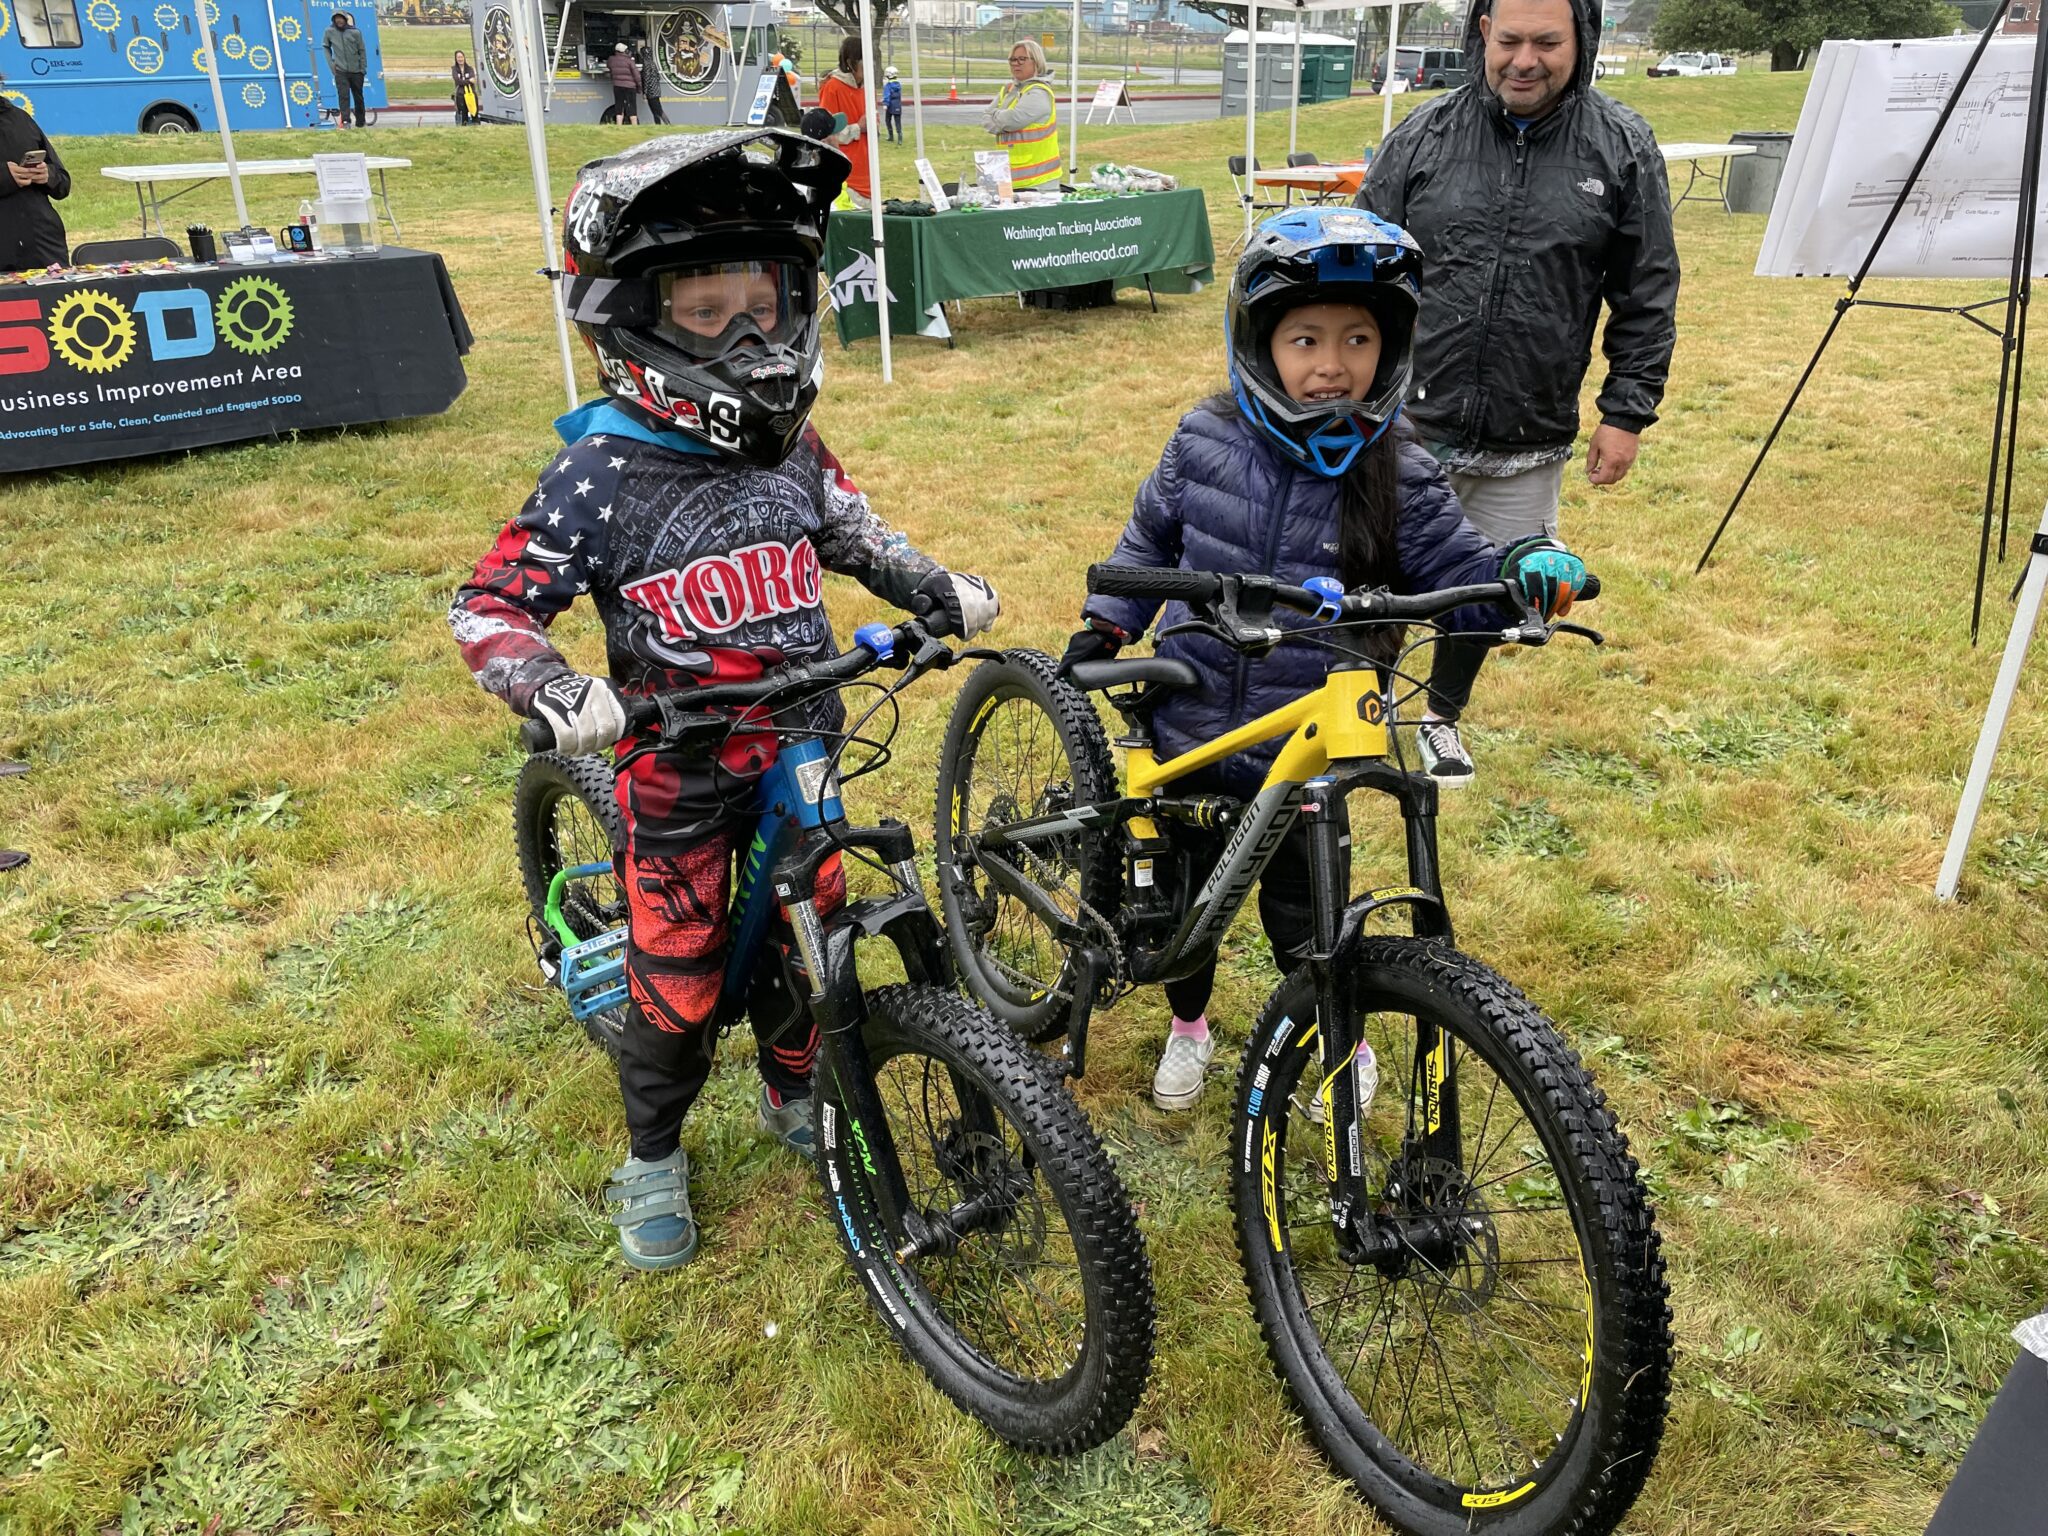 Two children wearing bike helmets stand with their mountain bikes at the SDOT booth, where they received free bike safety lights that attach to their handlebars.